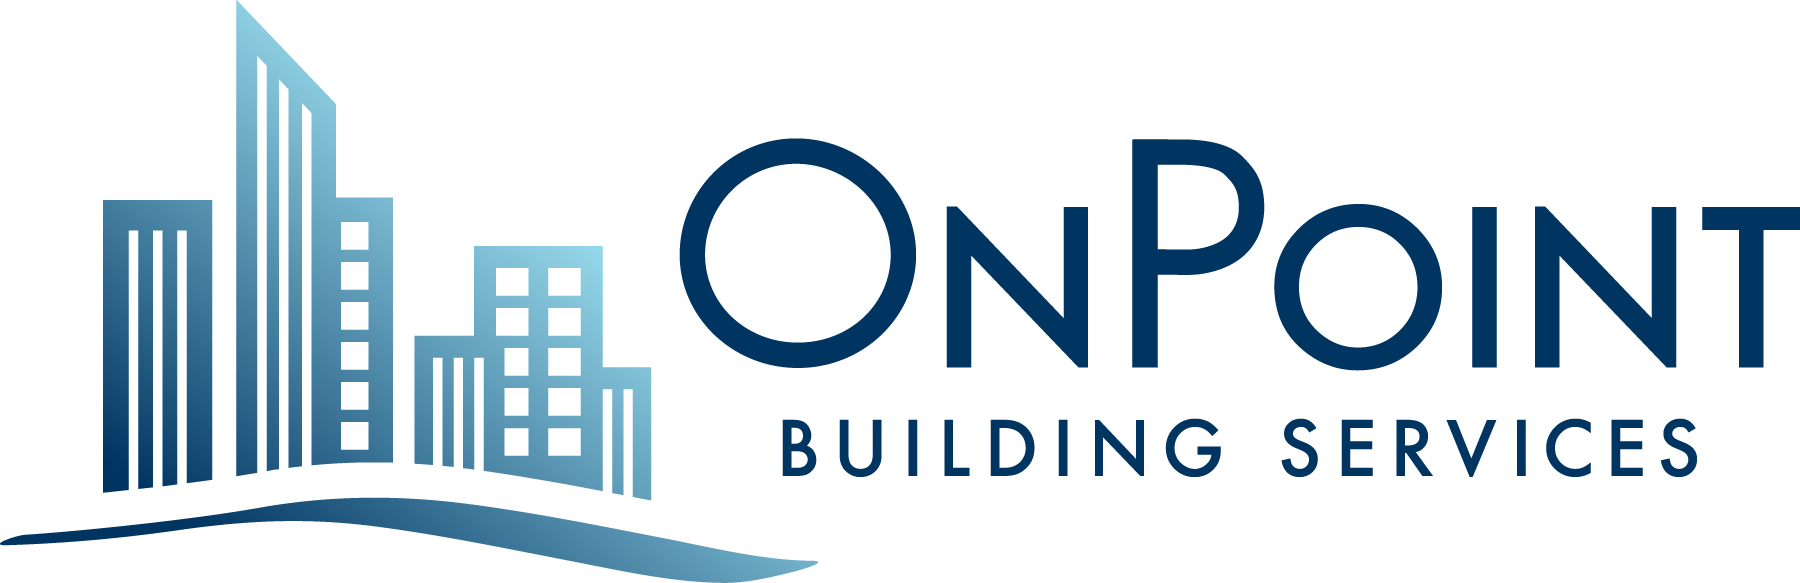 OnPoint Building Services Company Logo